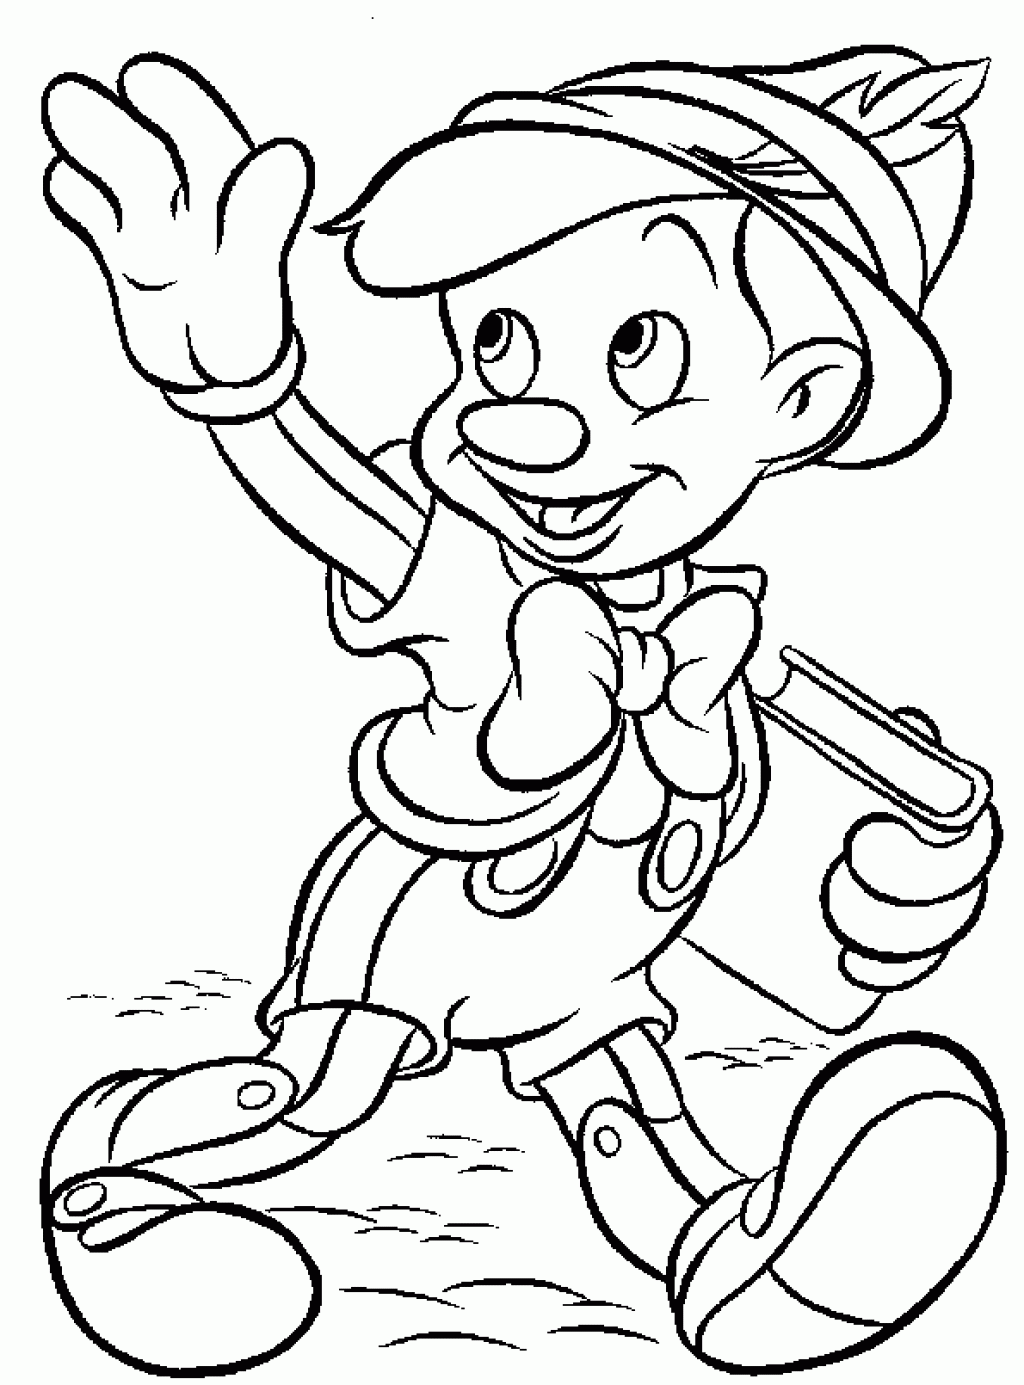 pinocchio coloring page,printable,coloring pages